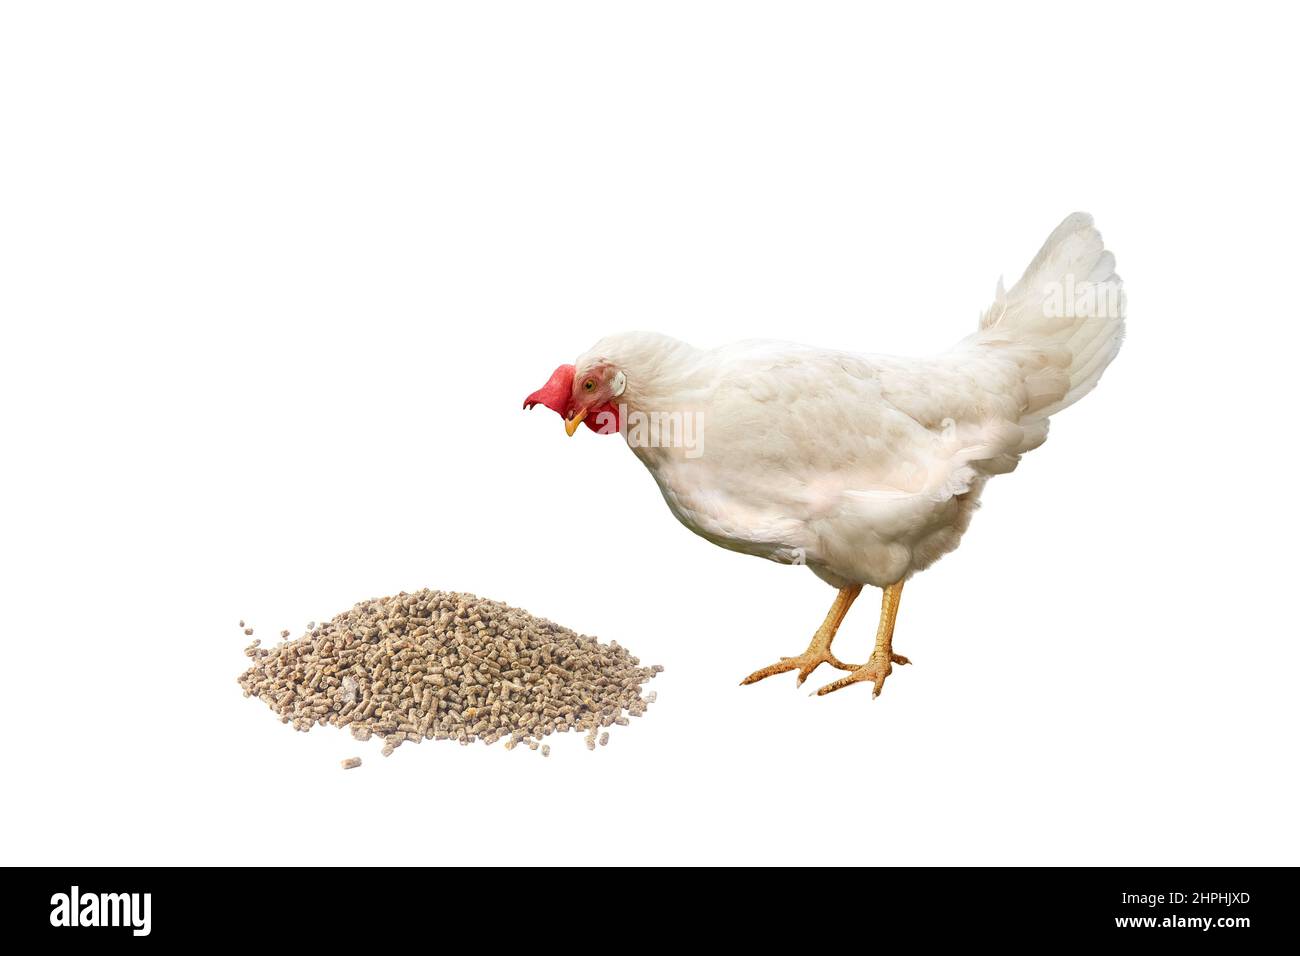 White hen with red comb looks at granulated chicken feed Stock Photo